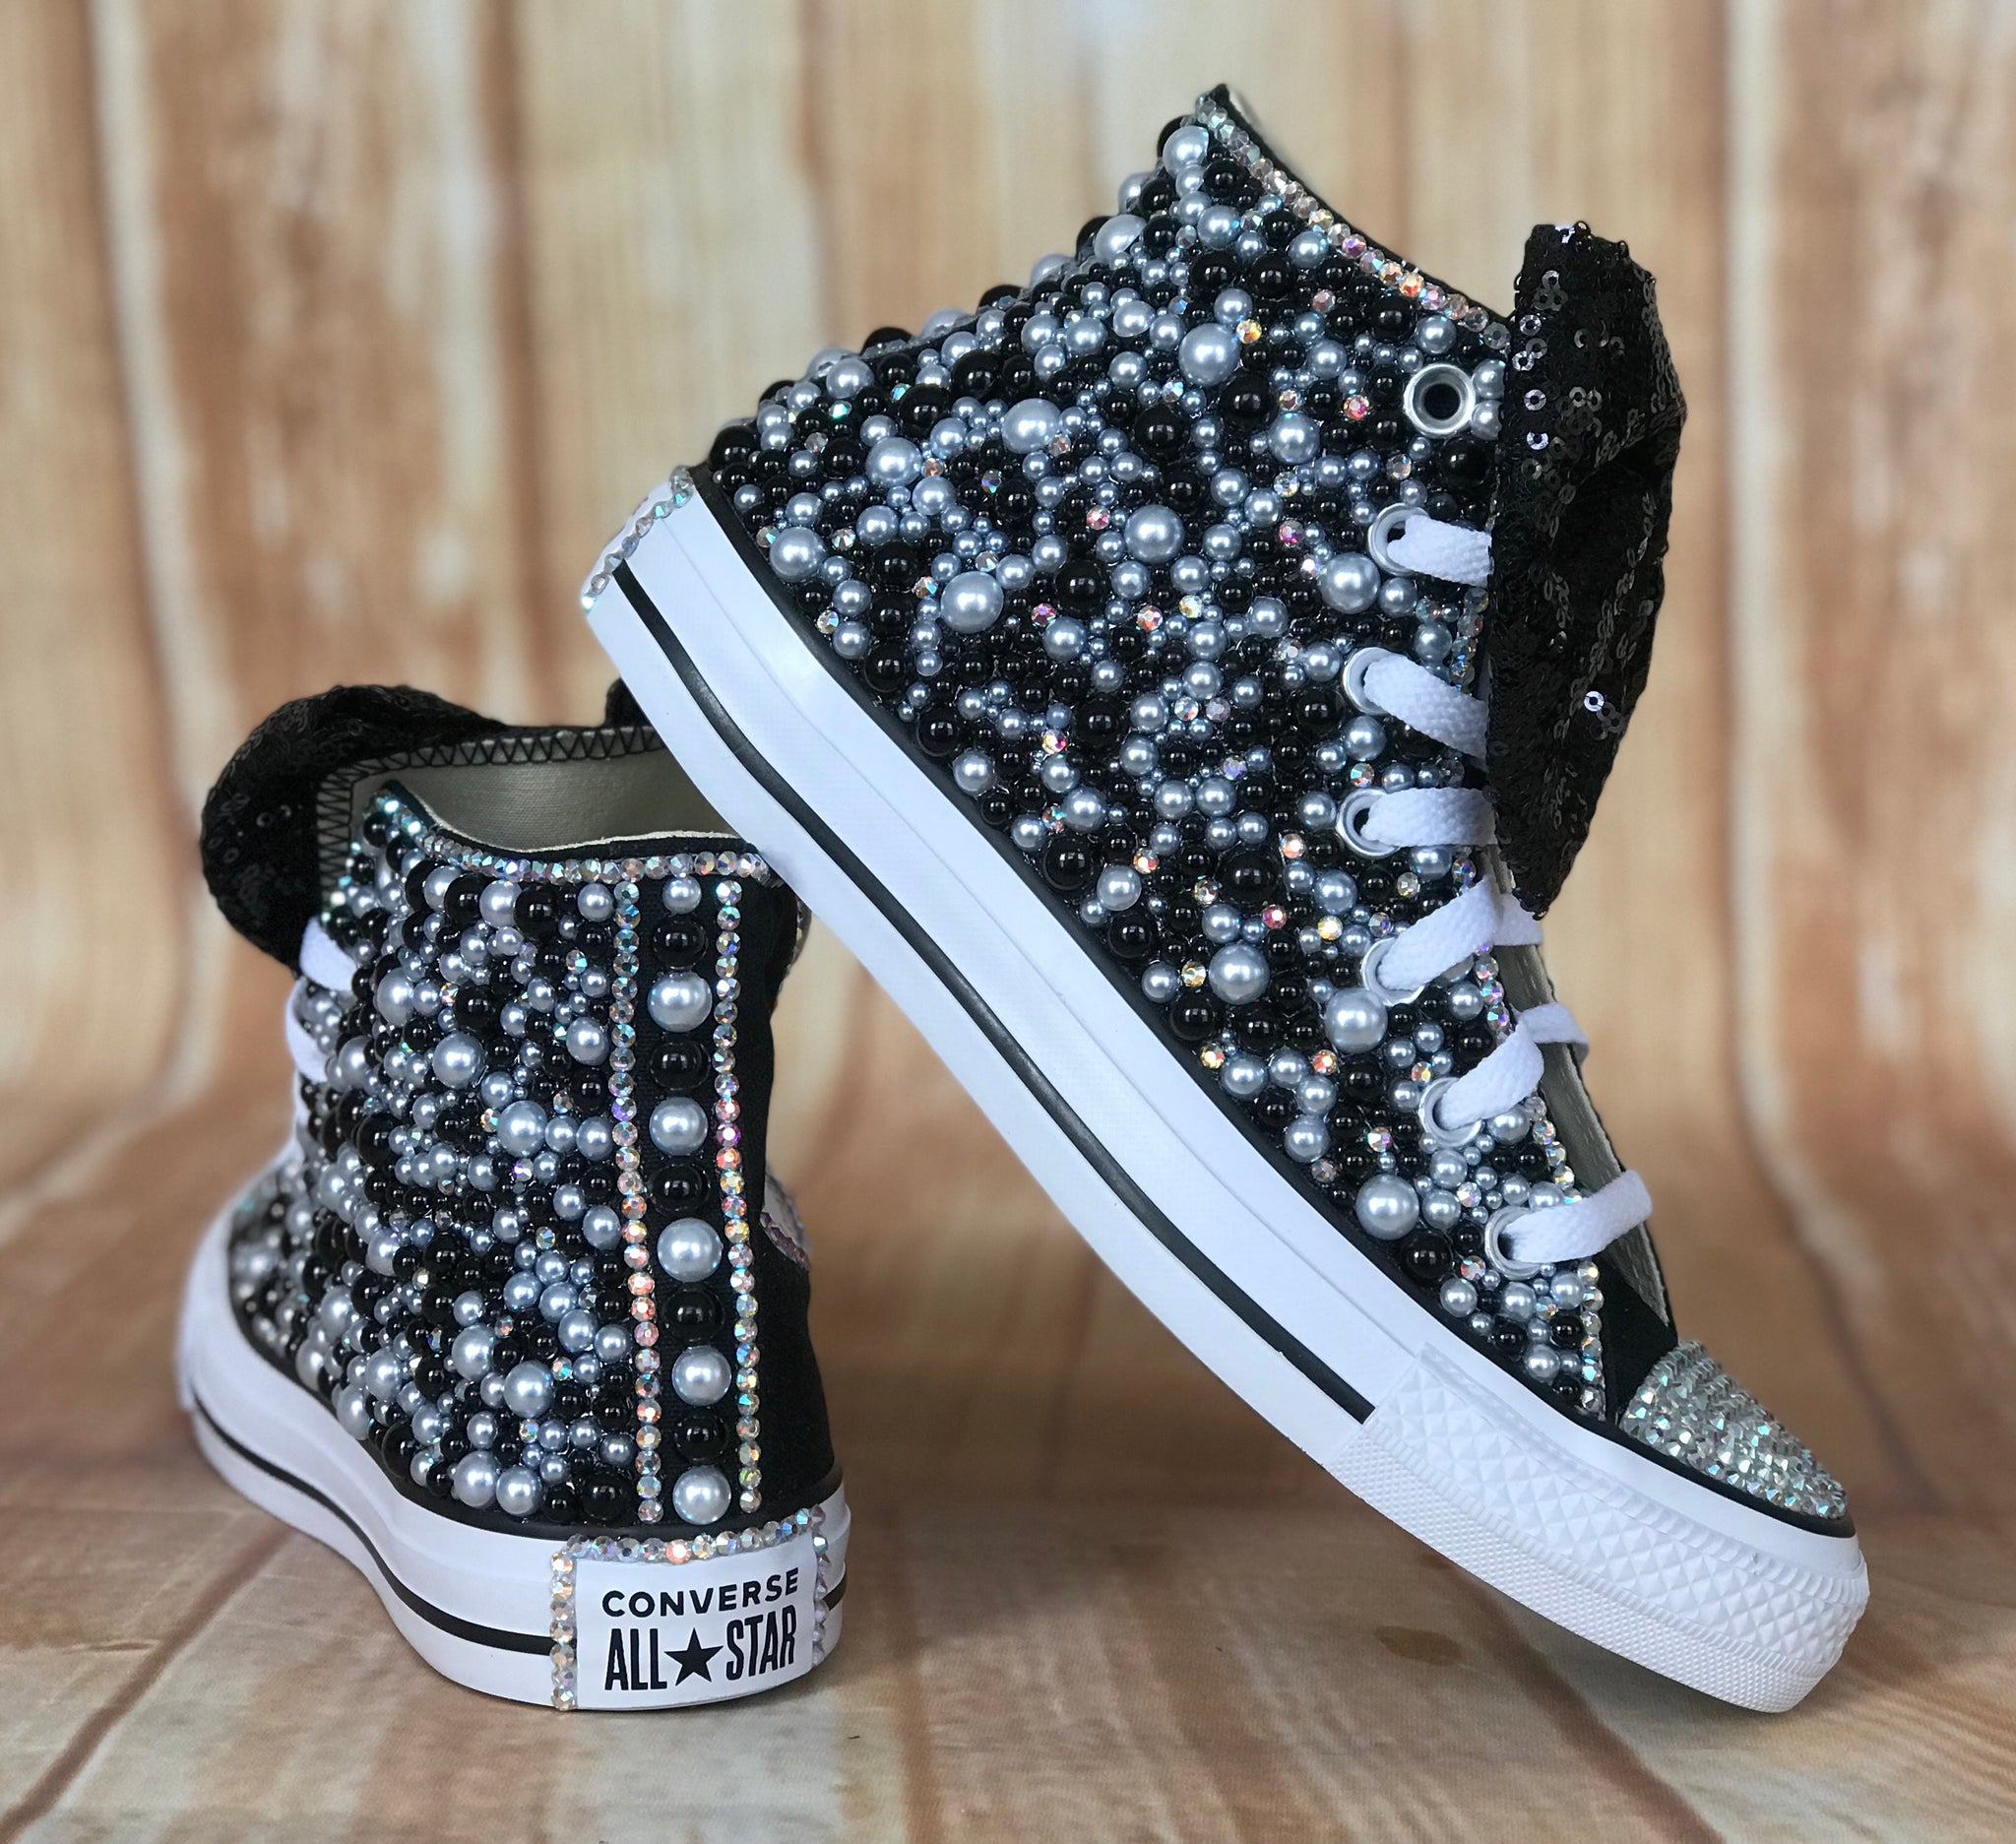 infant black and white converse